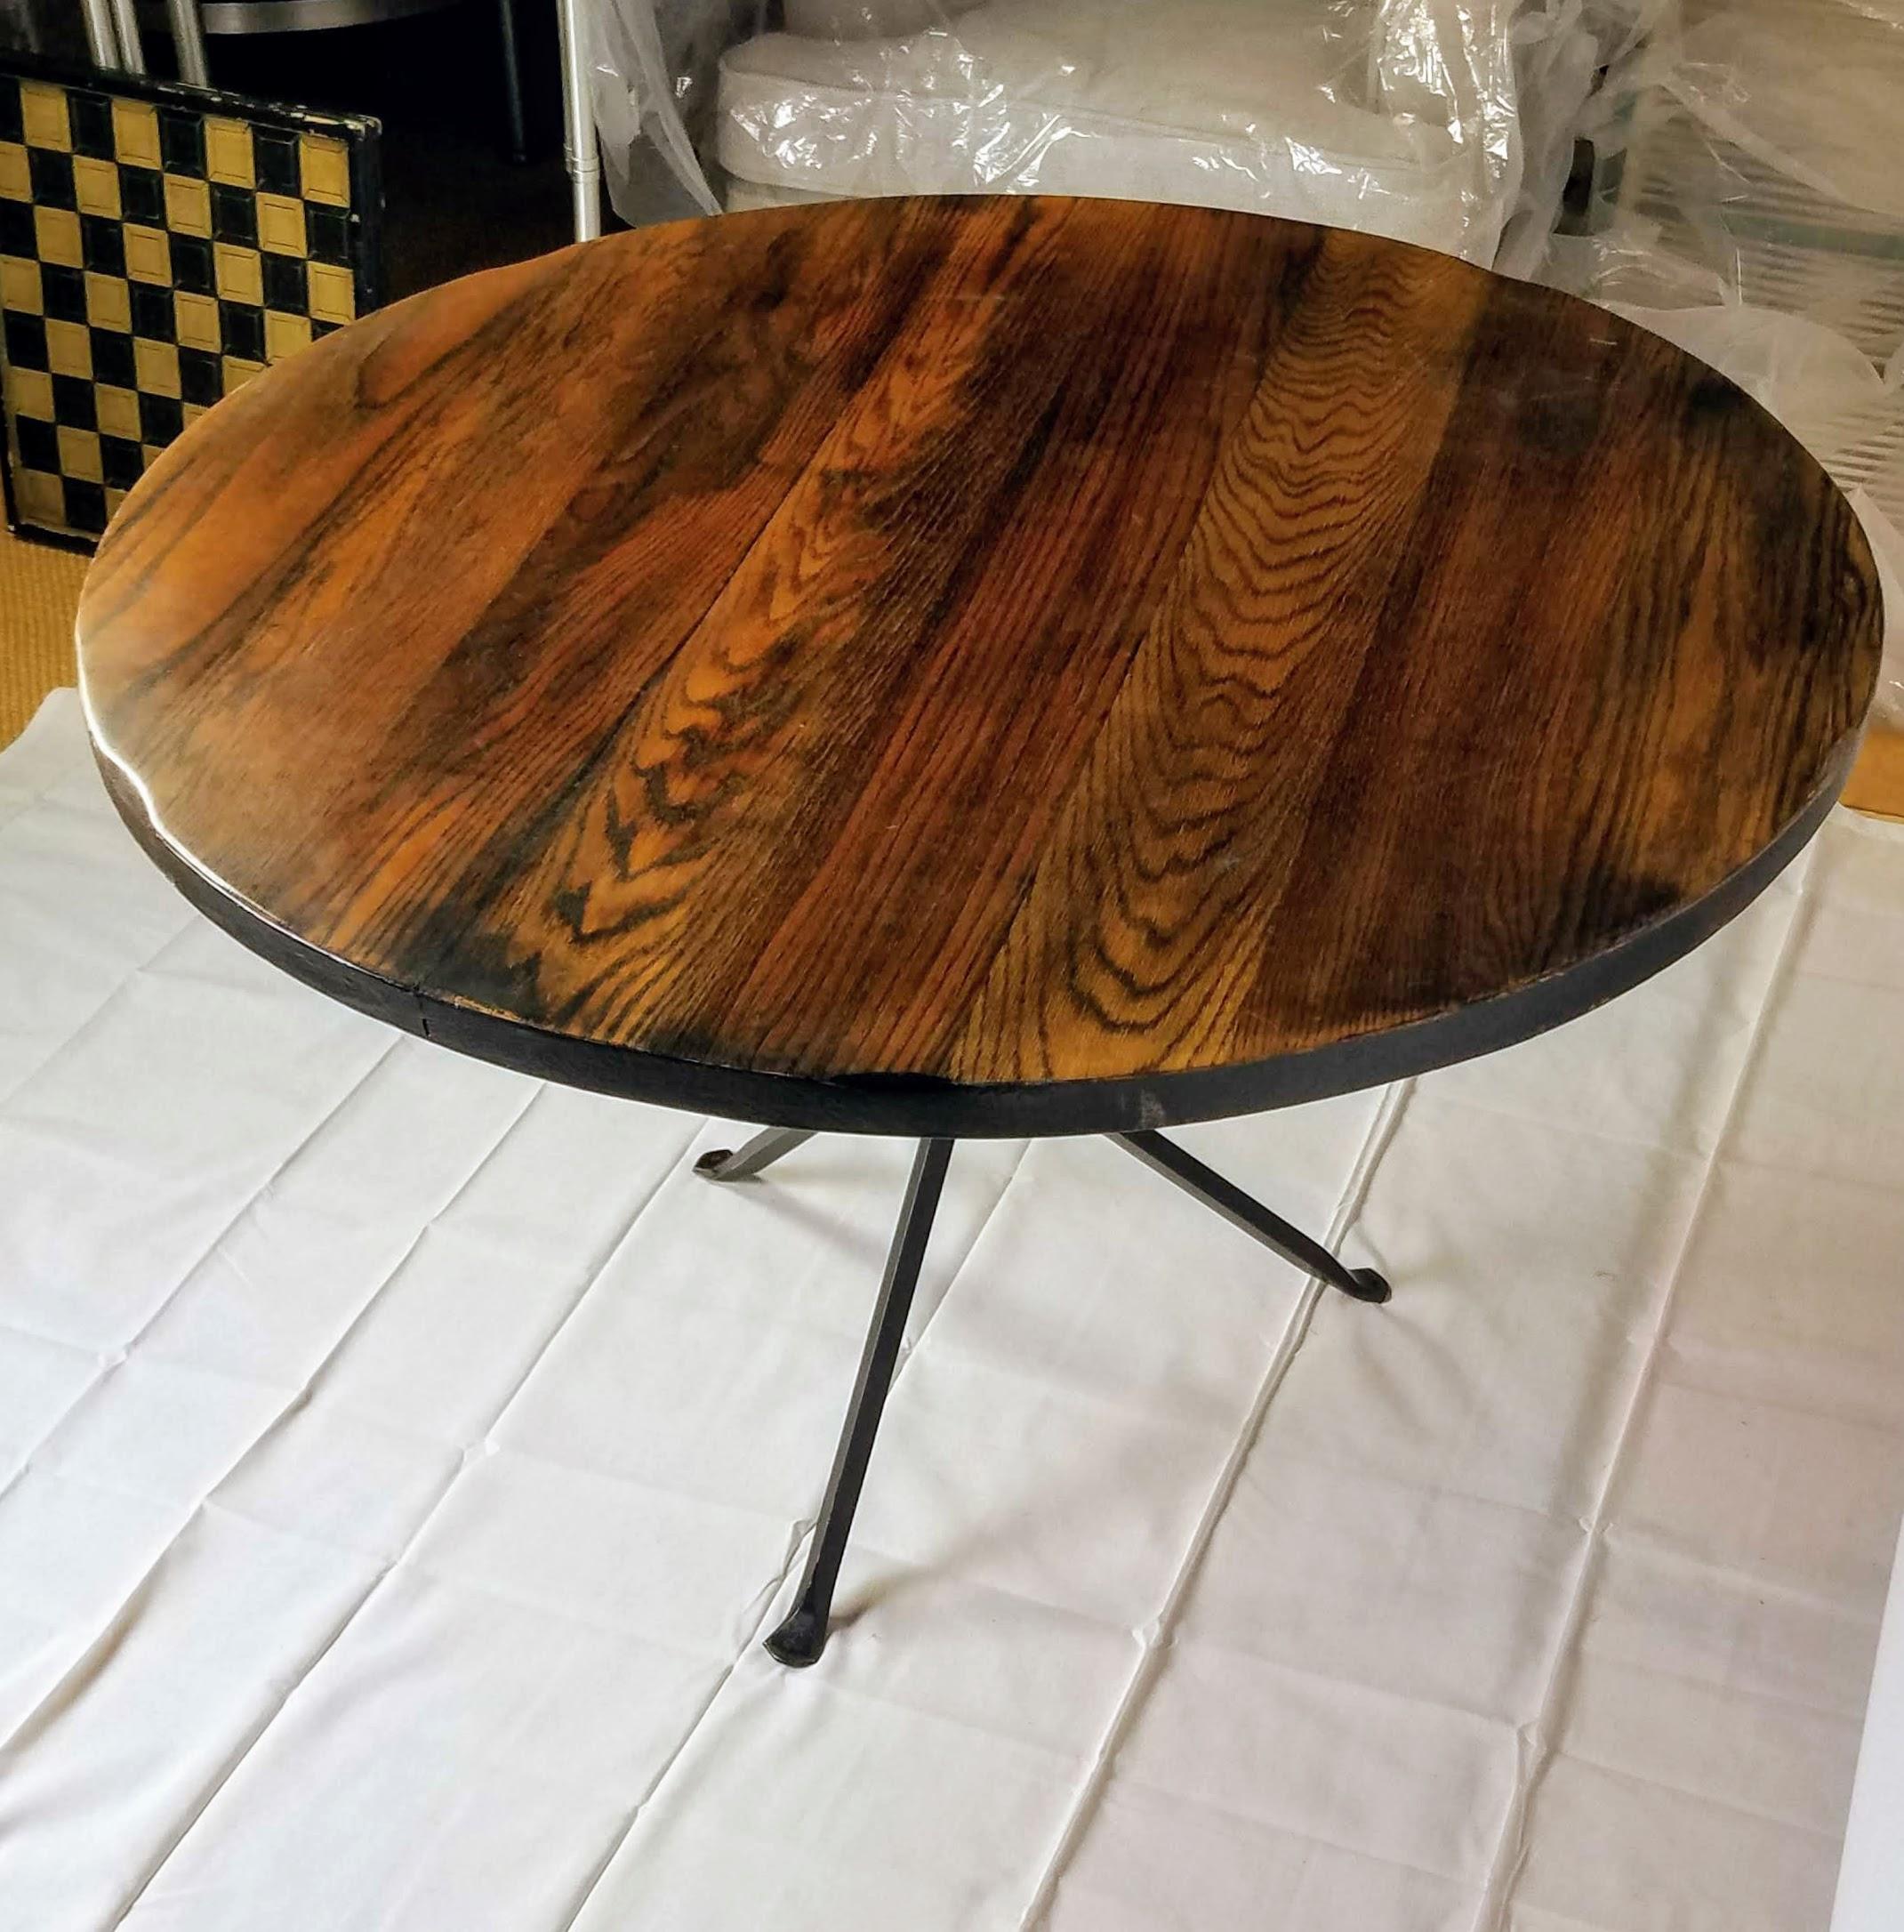 American Cleo Baldon Wrought Iron Round Smoked Oak Dining Table El Monte, CA. c. 1968 For Sale